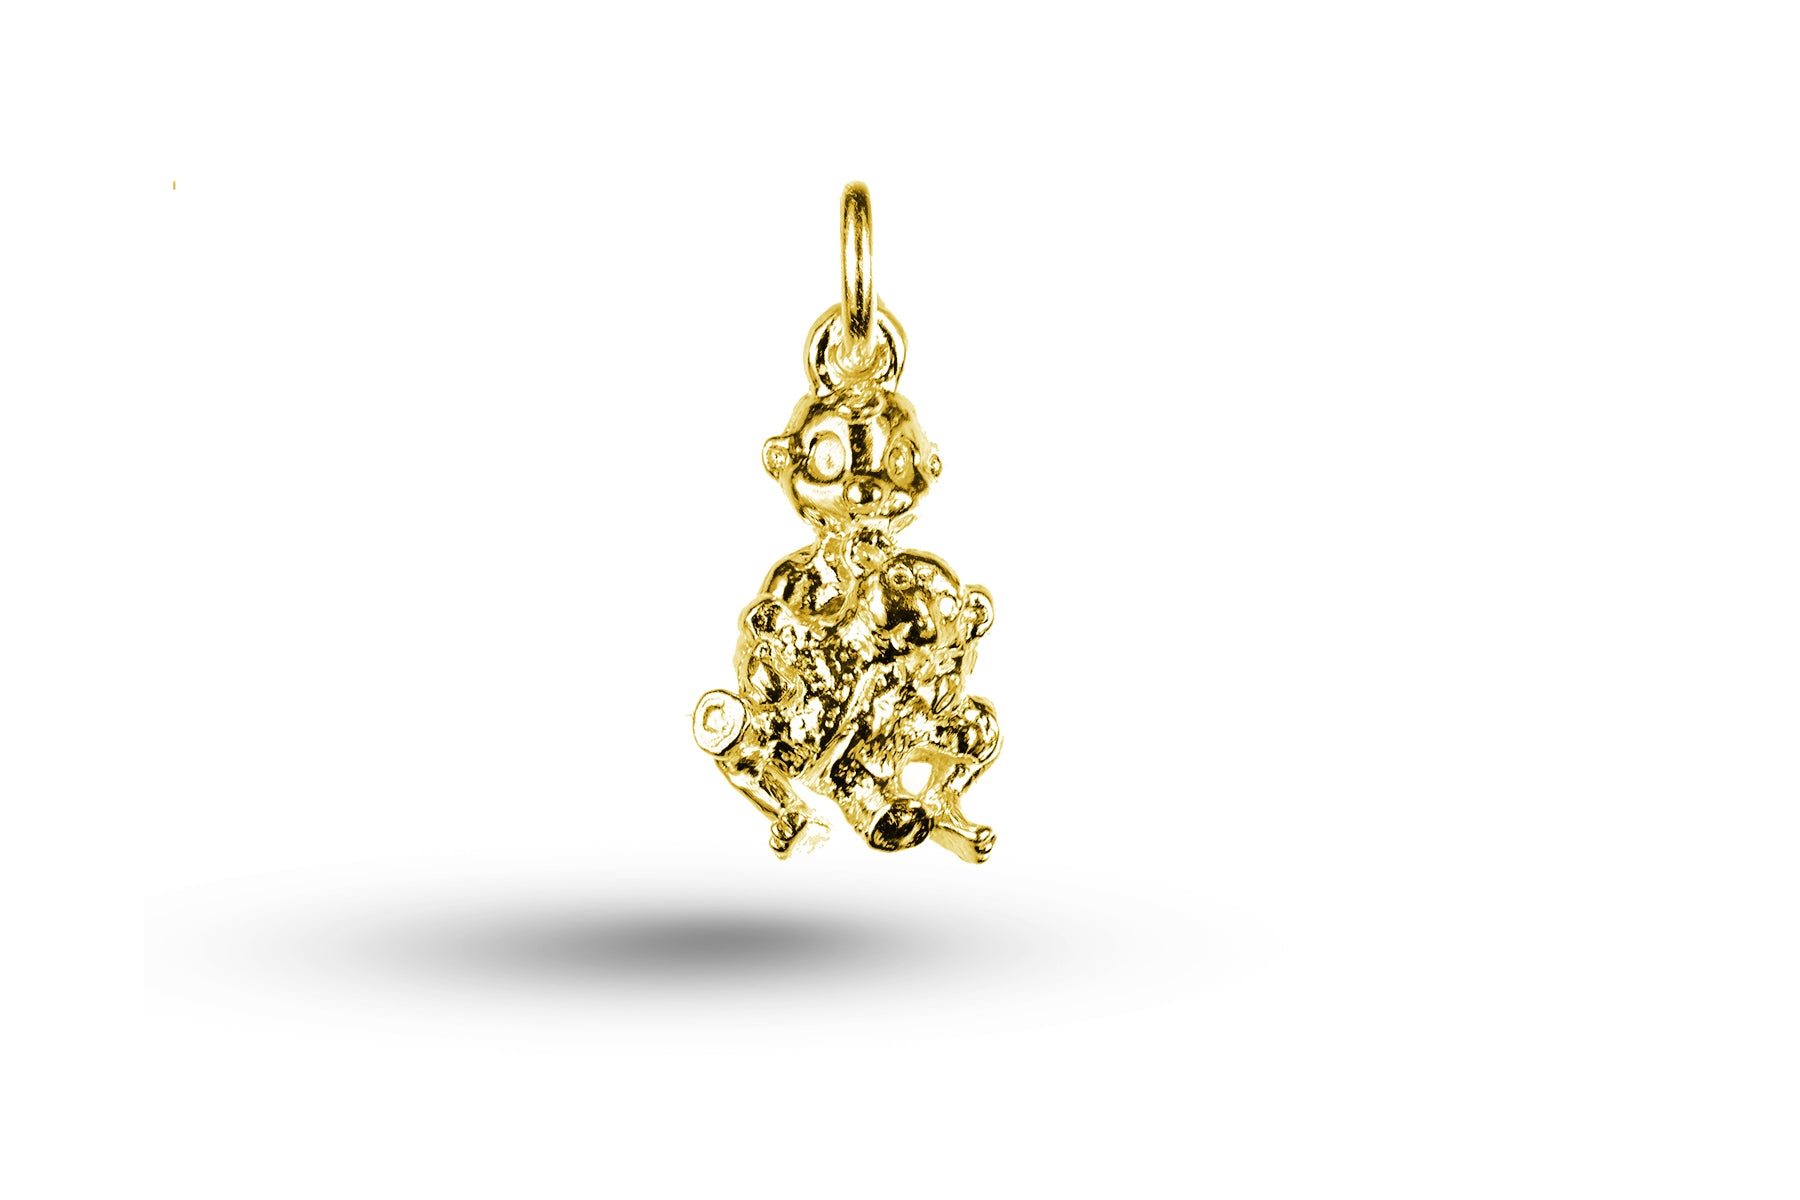 Luxury yellow gold baby and teddy bear charm.